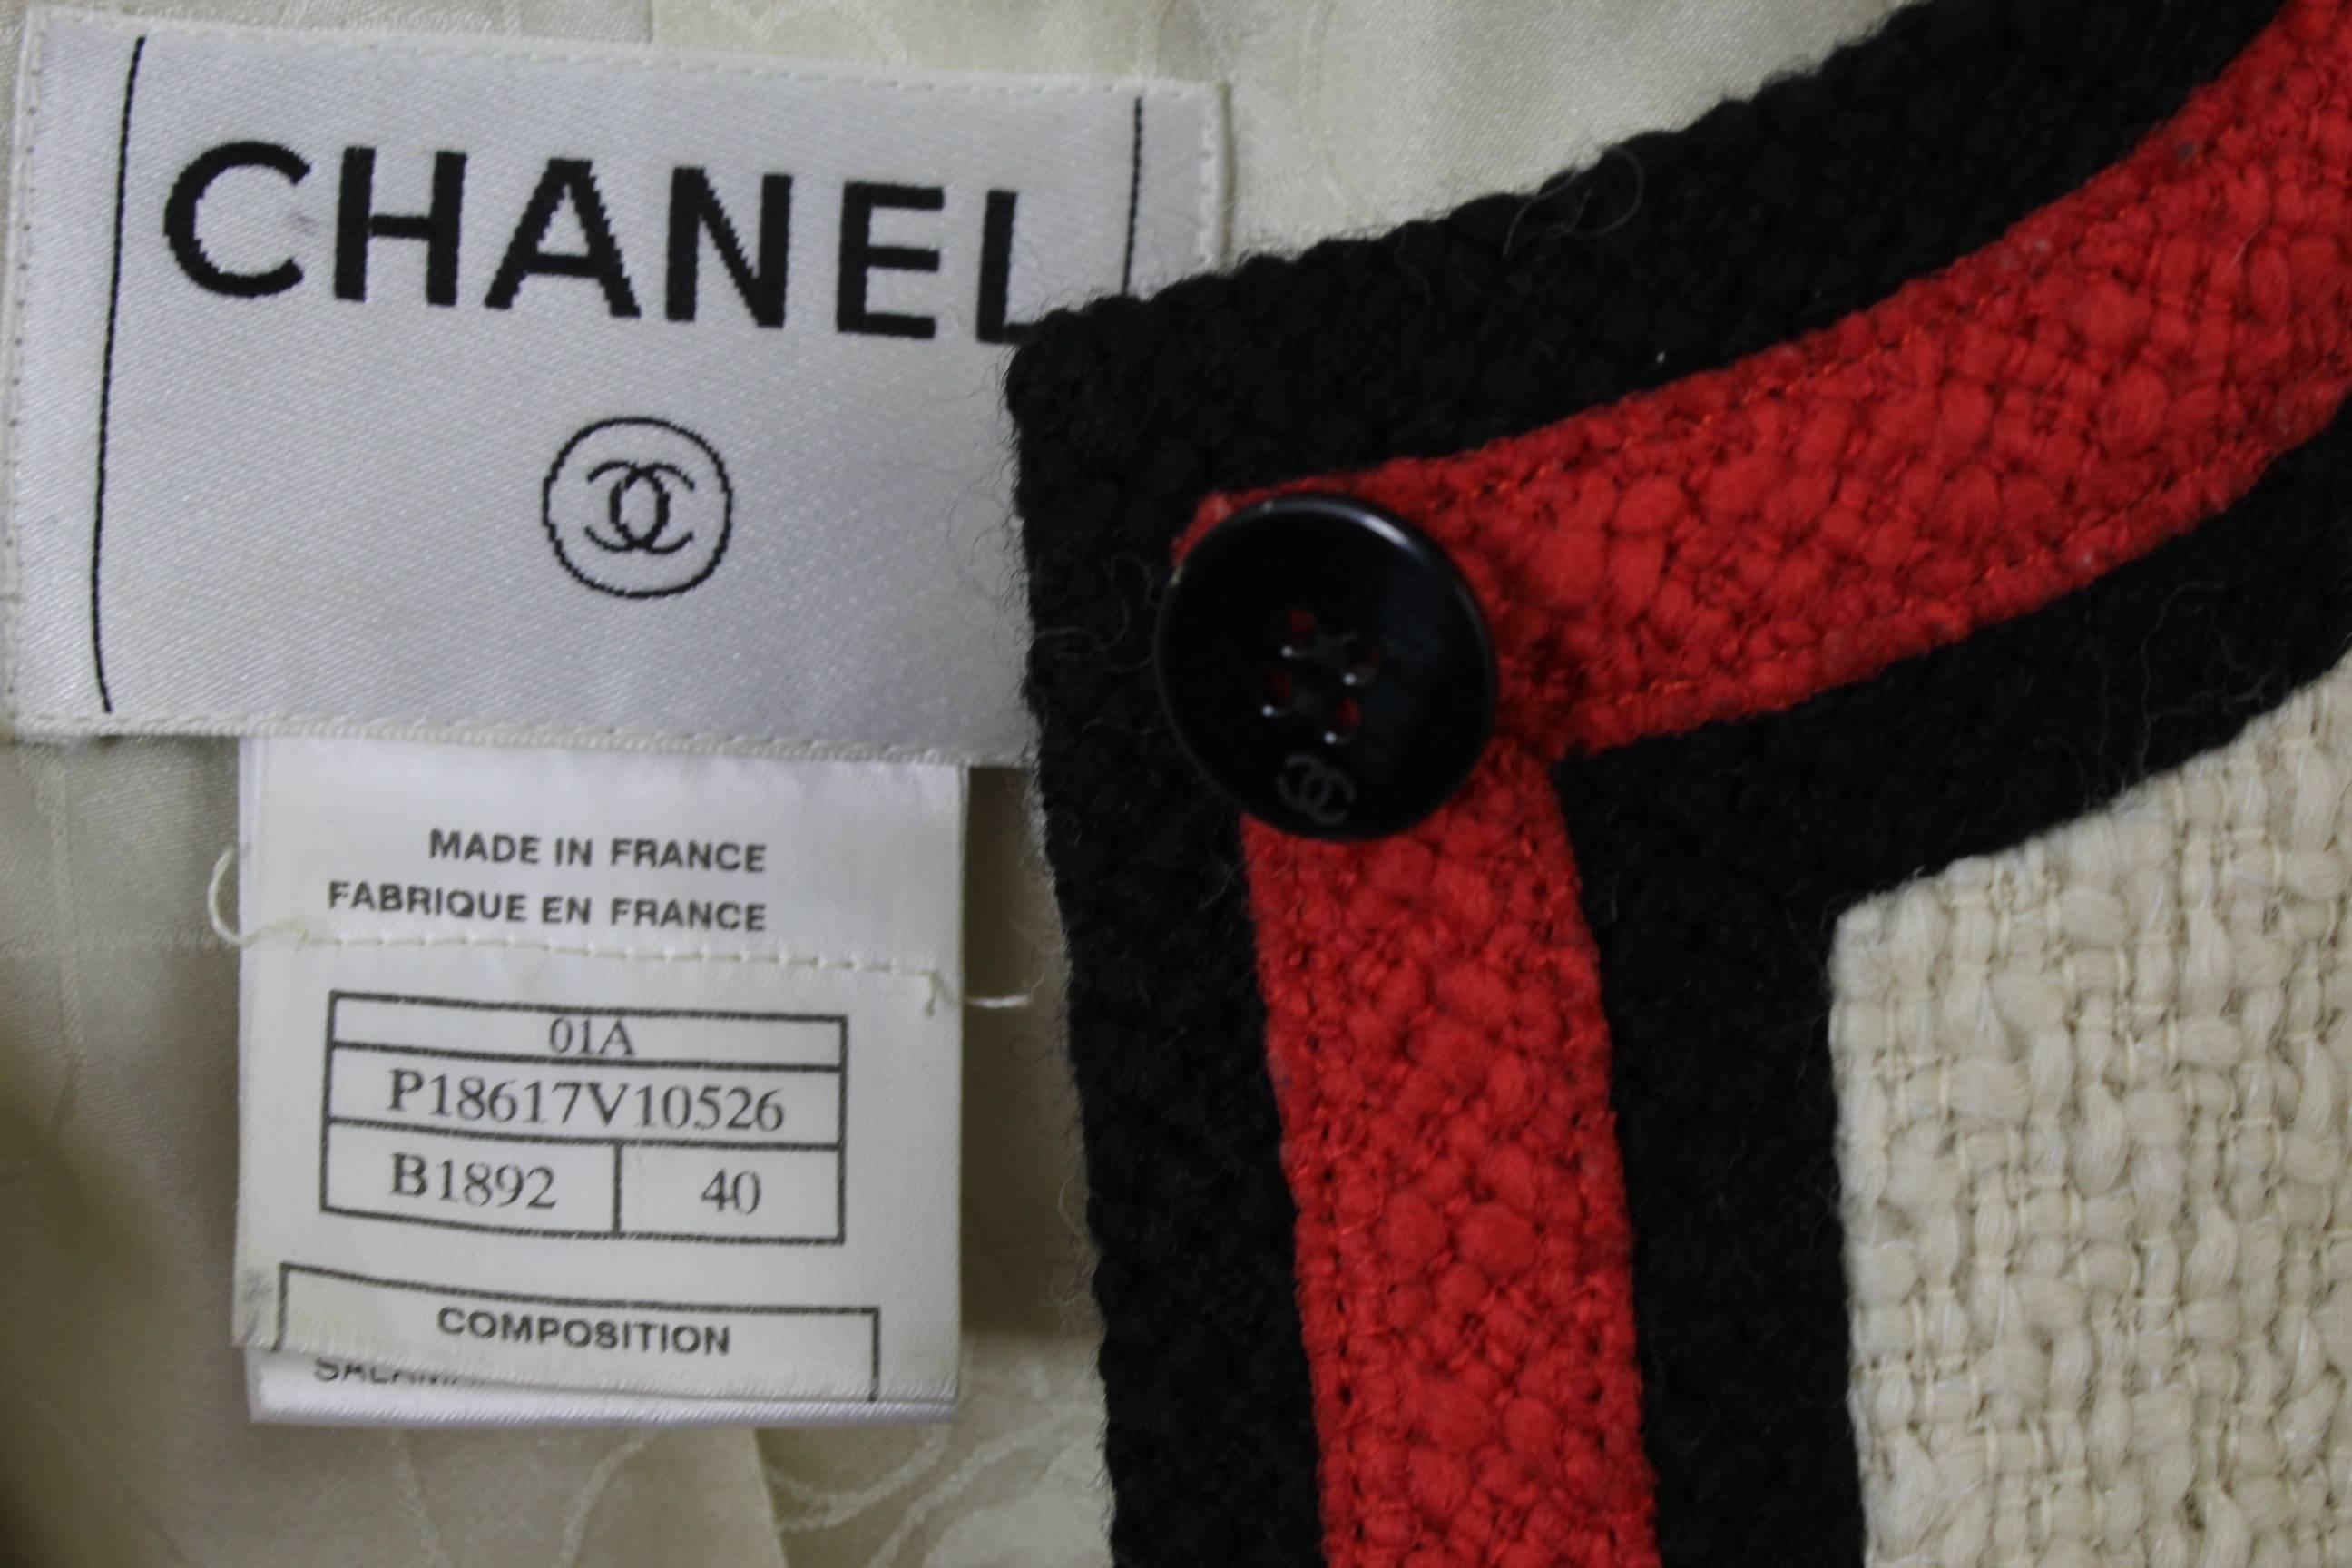 Really ncie short jacket form Chanel 2001 Collection

In red and white/beige tweed

Excellent condition.

Size 40